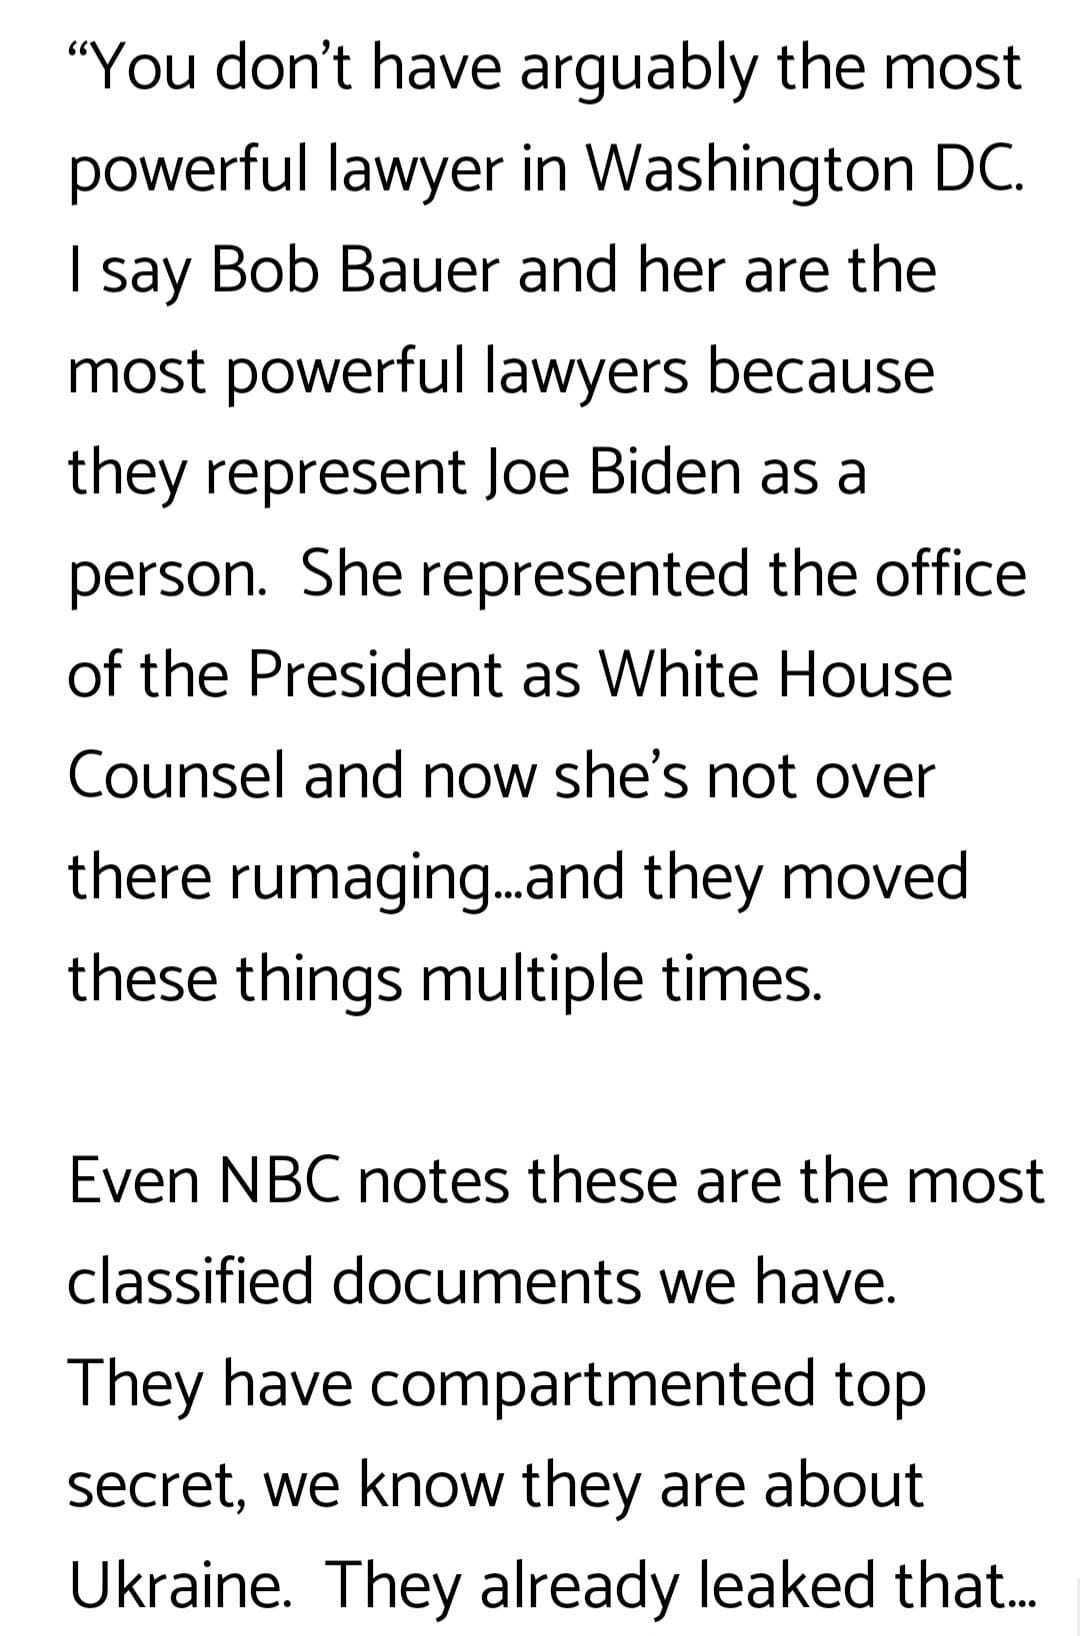 May be an image of text that says '"You don't have arguably the most powerful lawyer in Washington DC. I say Bob Bauer and her are the most powerful lawyers because they represent Joe Biden as a person. She represented the office of the President as White House Counsel and now she's not over there rumaging... ..and they moved these things multiple times. Even NBC notes these are the most classified documents we have. They have compartmented top secret, we know they are about Ukraine. They already leaked that...'